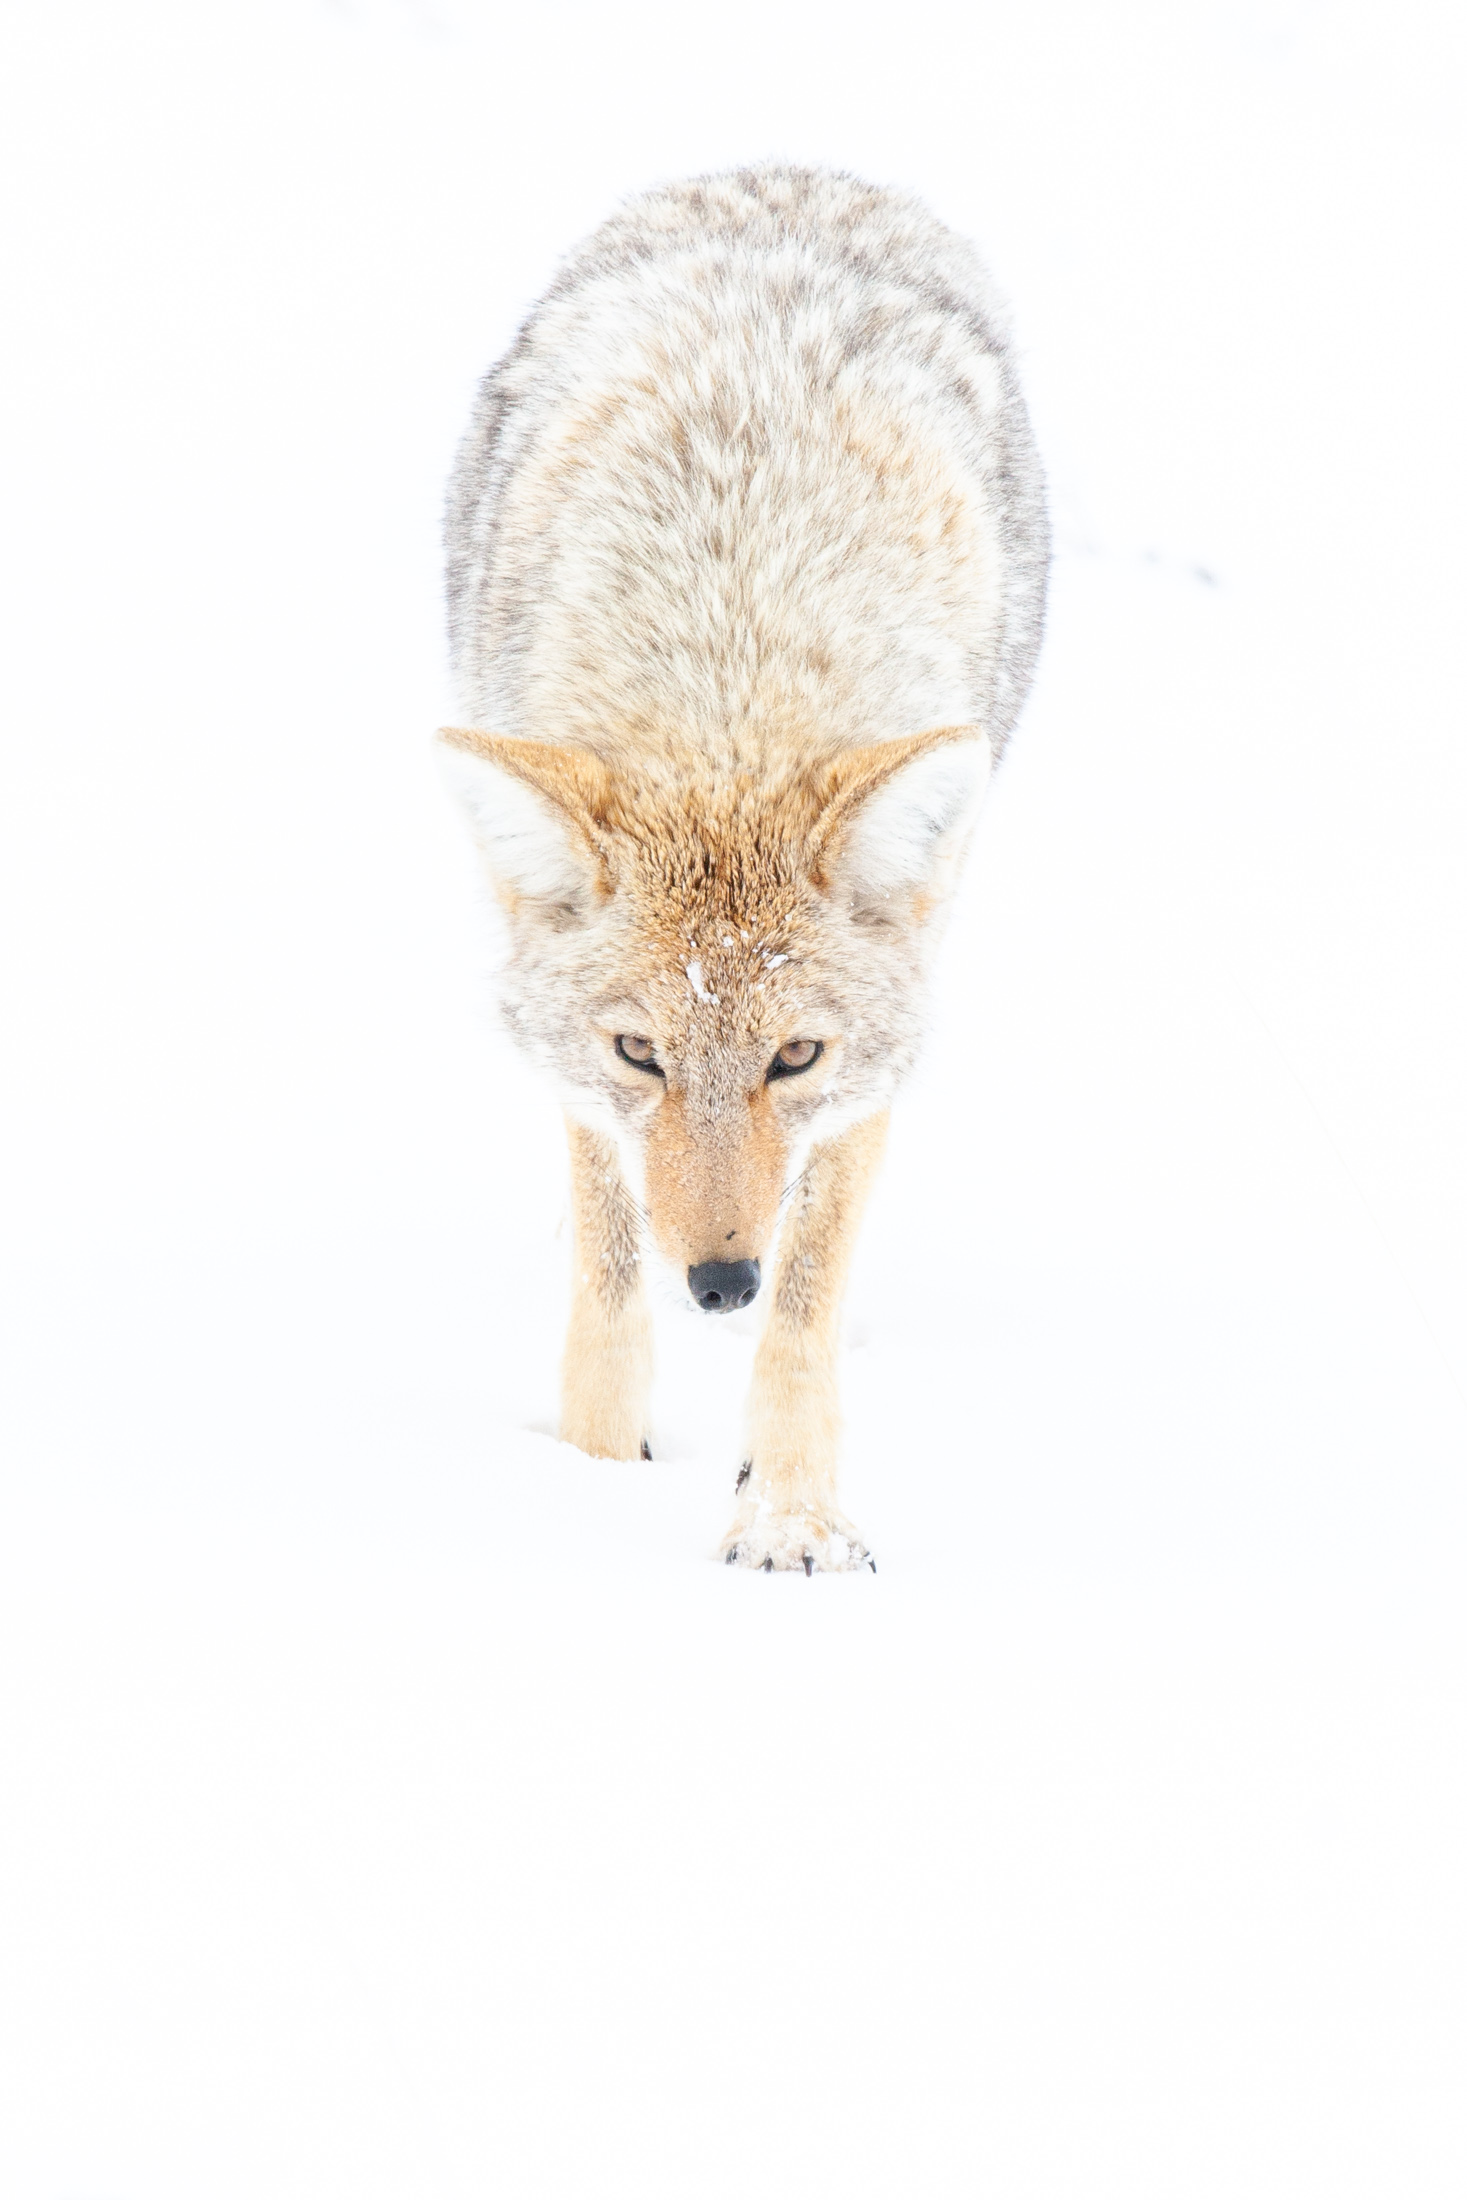 Coyote Photograph 